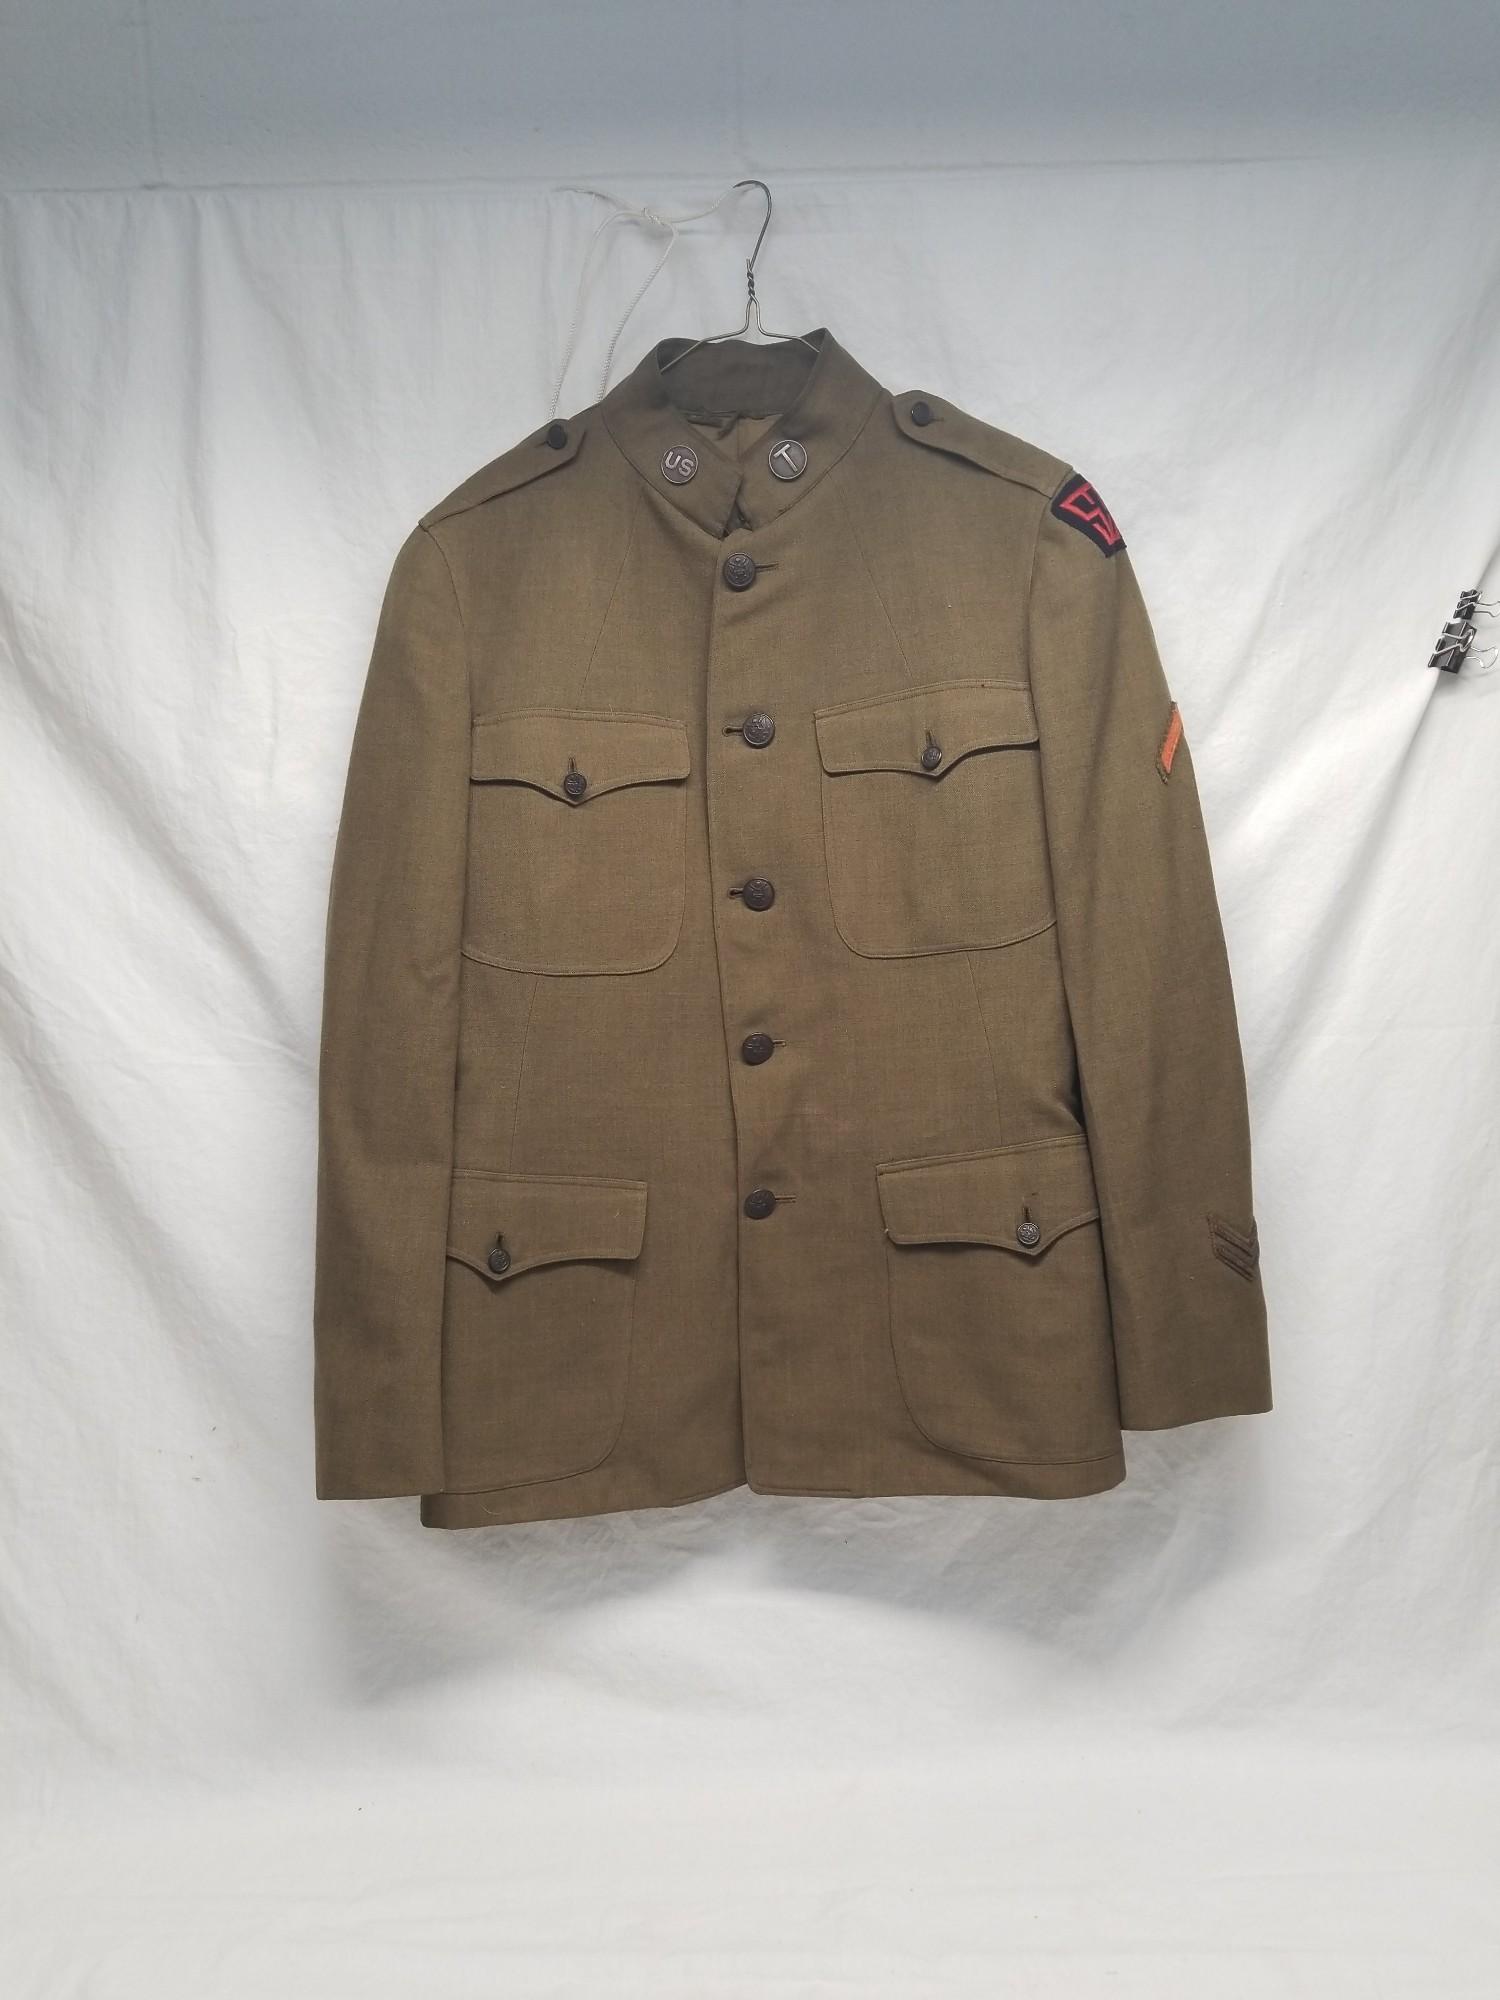 S.O.S (Service of Supply)tunic